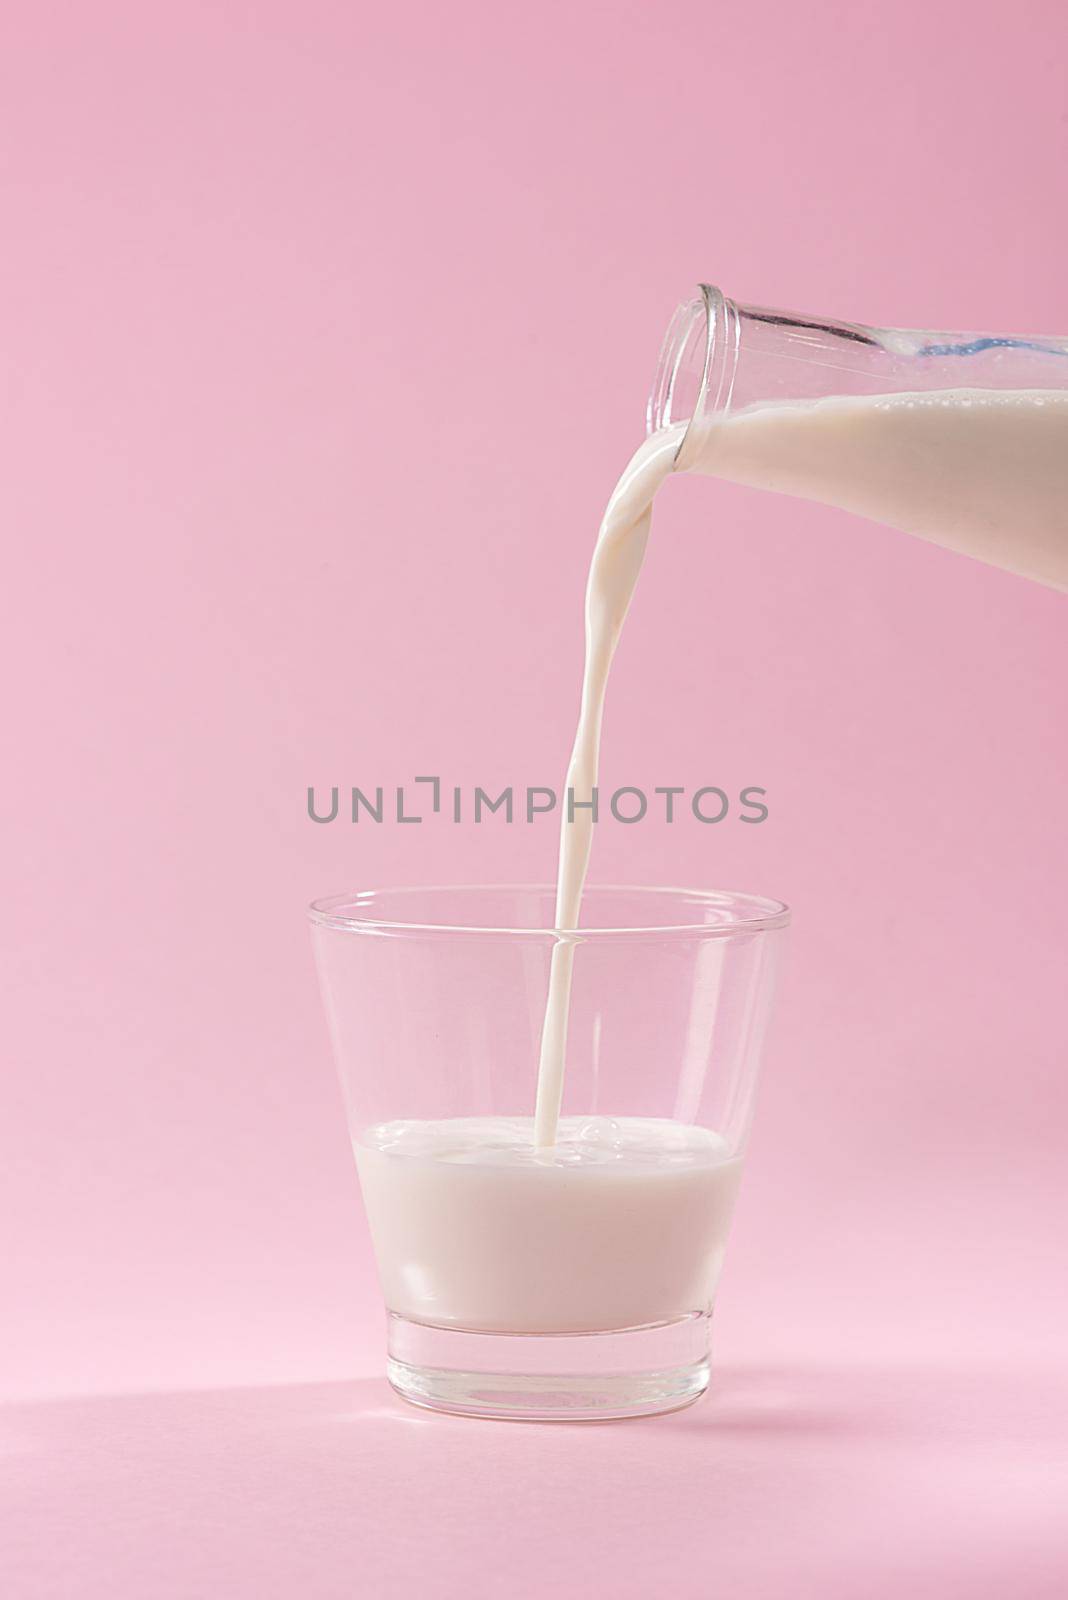 Pouring milk in to glass from bottle on a pink